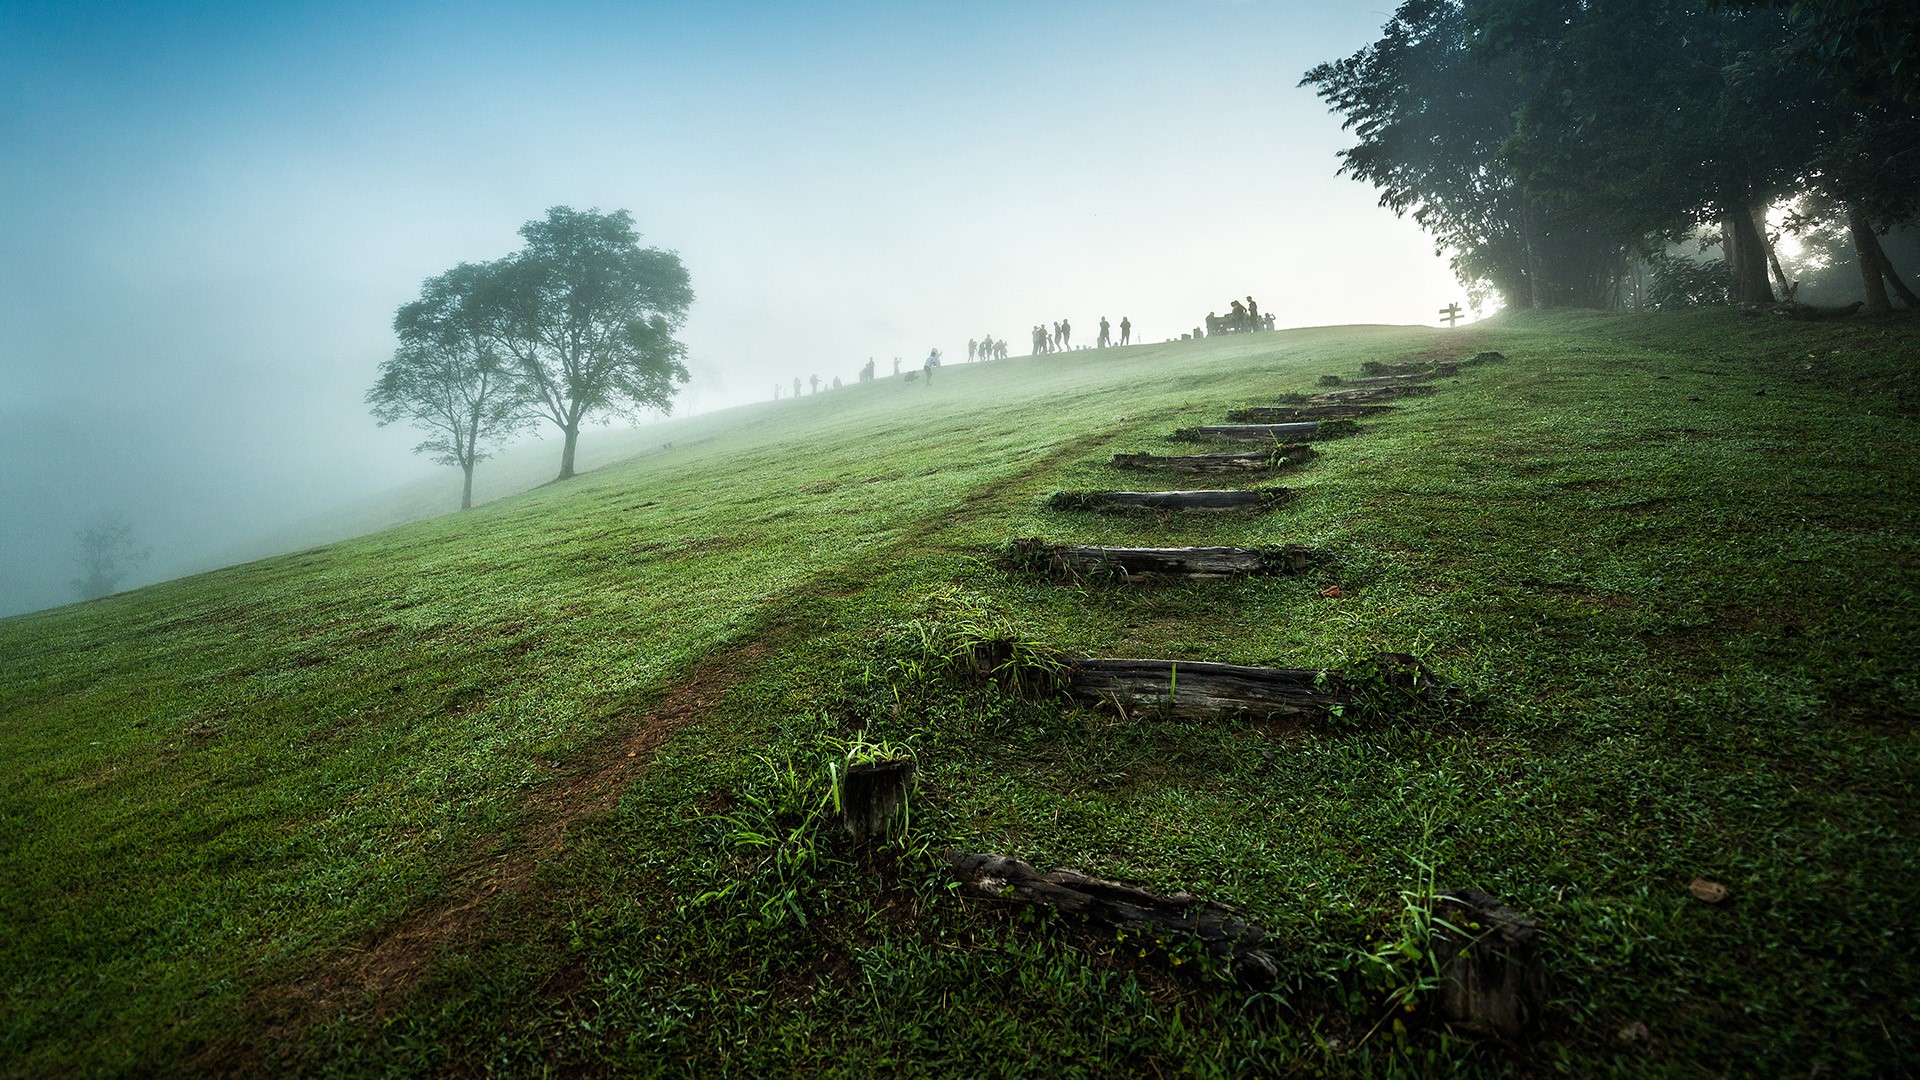 General 1920x1080 nature landscape grass sky mist stairs people national park Thailand hills